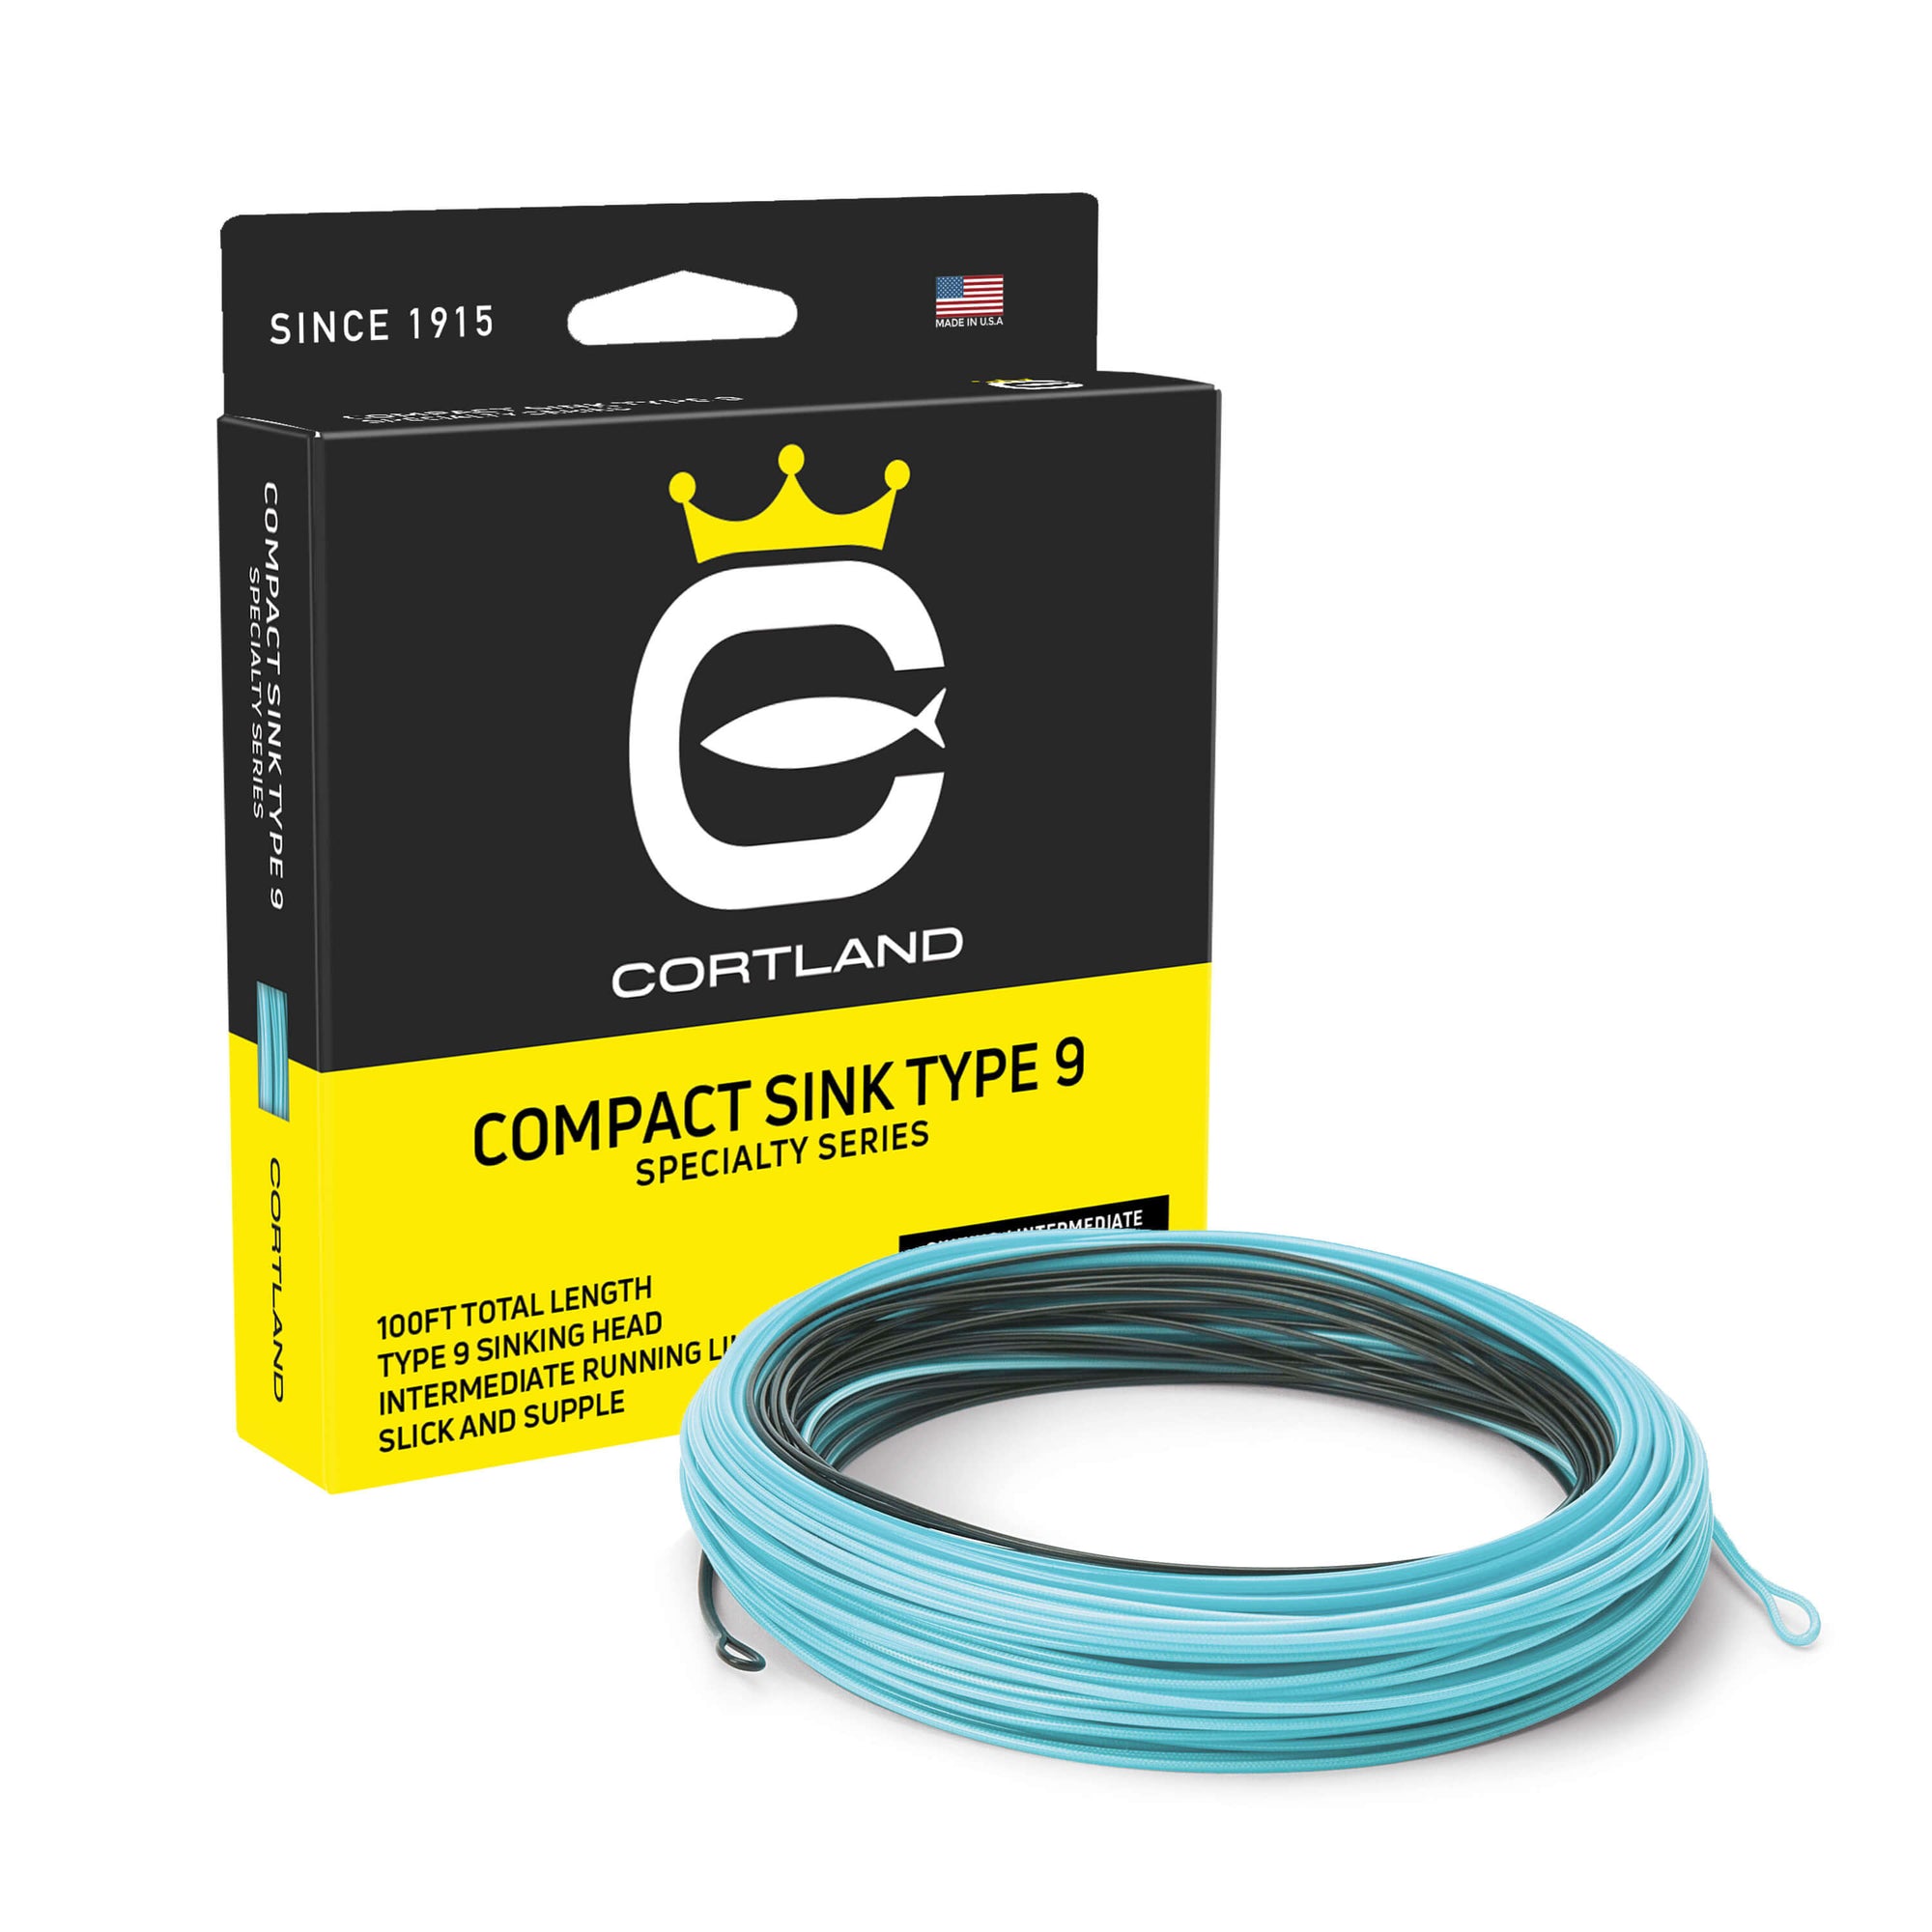 Compact Sink Type 9 Fly Line Box and Coil. The coil is black and light blue. The box is black and yellow.